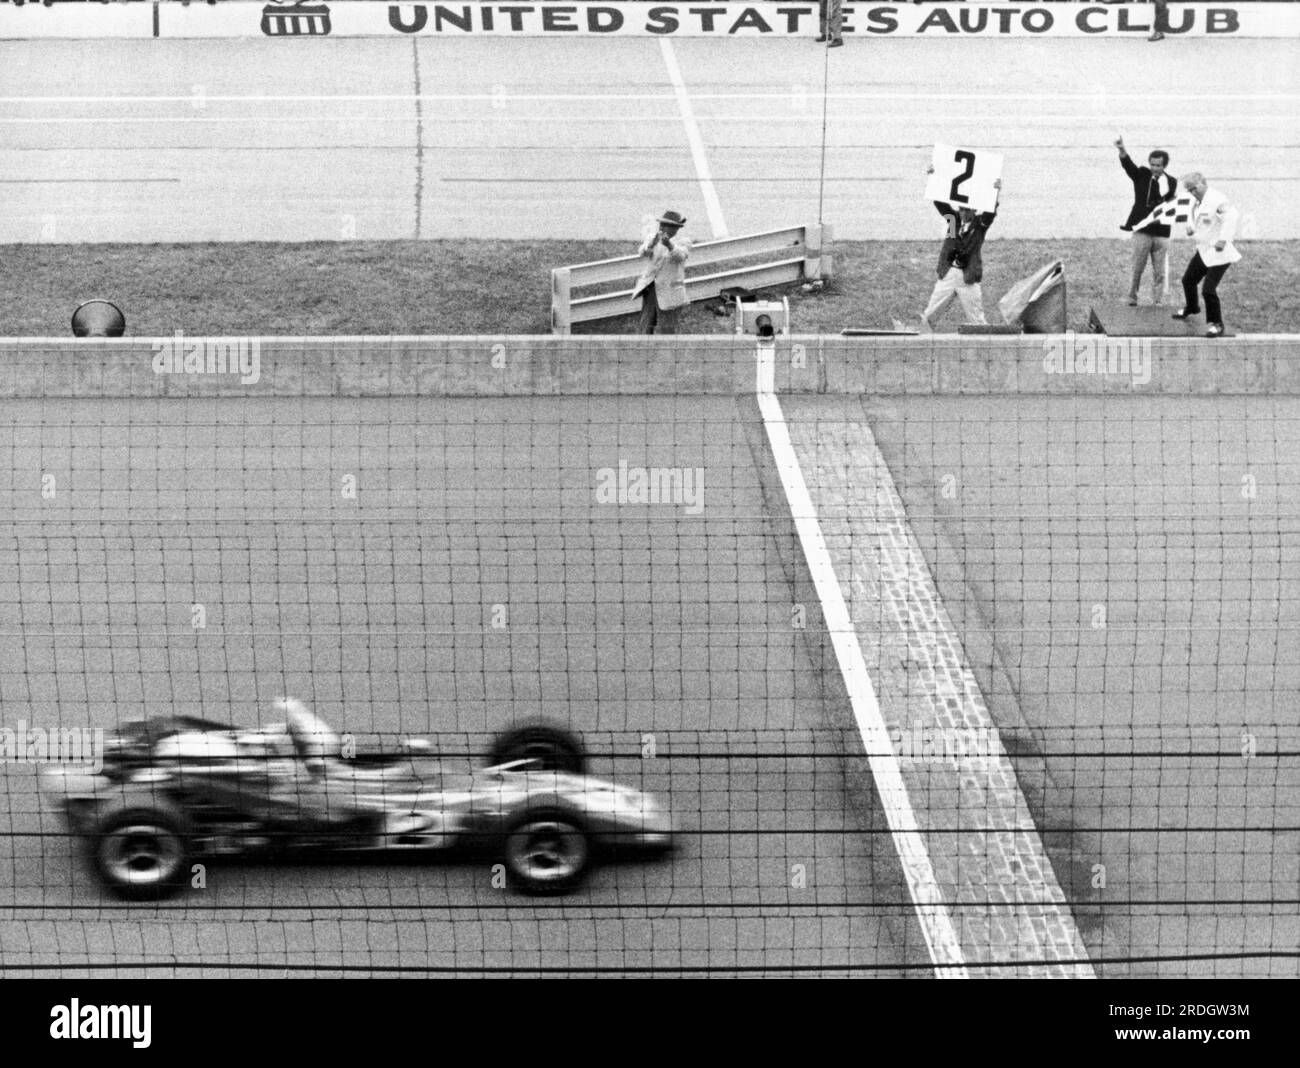 Indianapolis, Indiana:  May 30, 1970 Al Unser, driving car #2, speeds across the finish line and receives the checkered flag signal for victory at the annual Formula 1 Indianapolis 500 race. Stock Photo